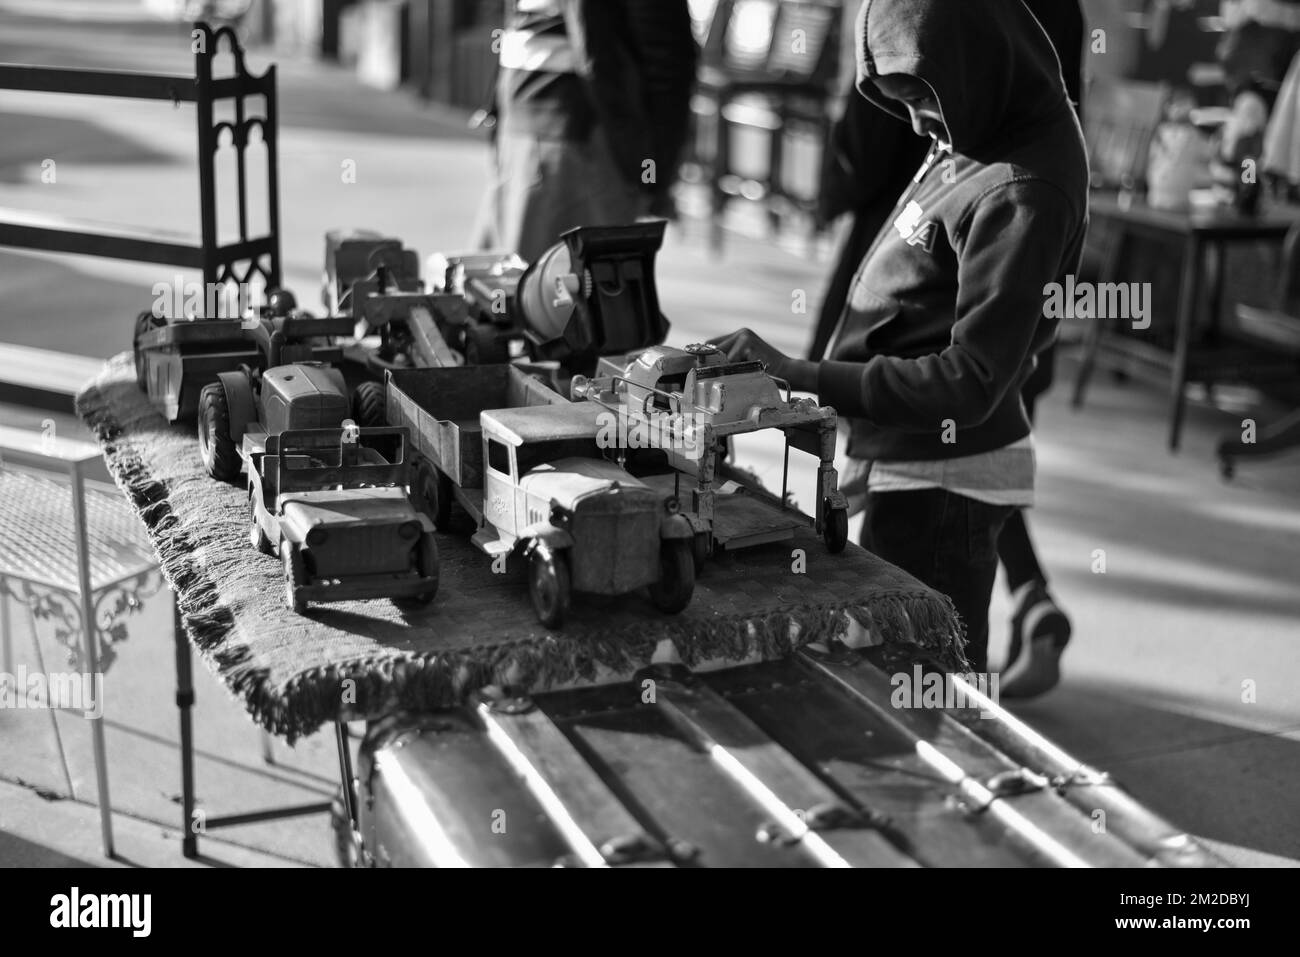 Candid photo of a little boy looking at vintage toy cars and trucks Stock Photo